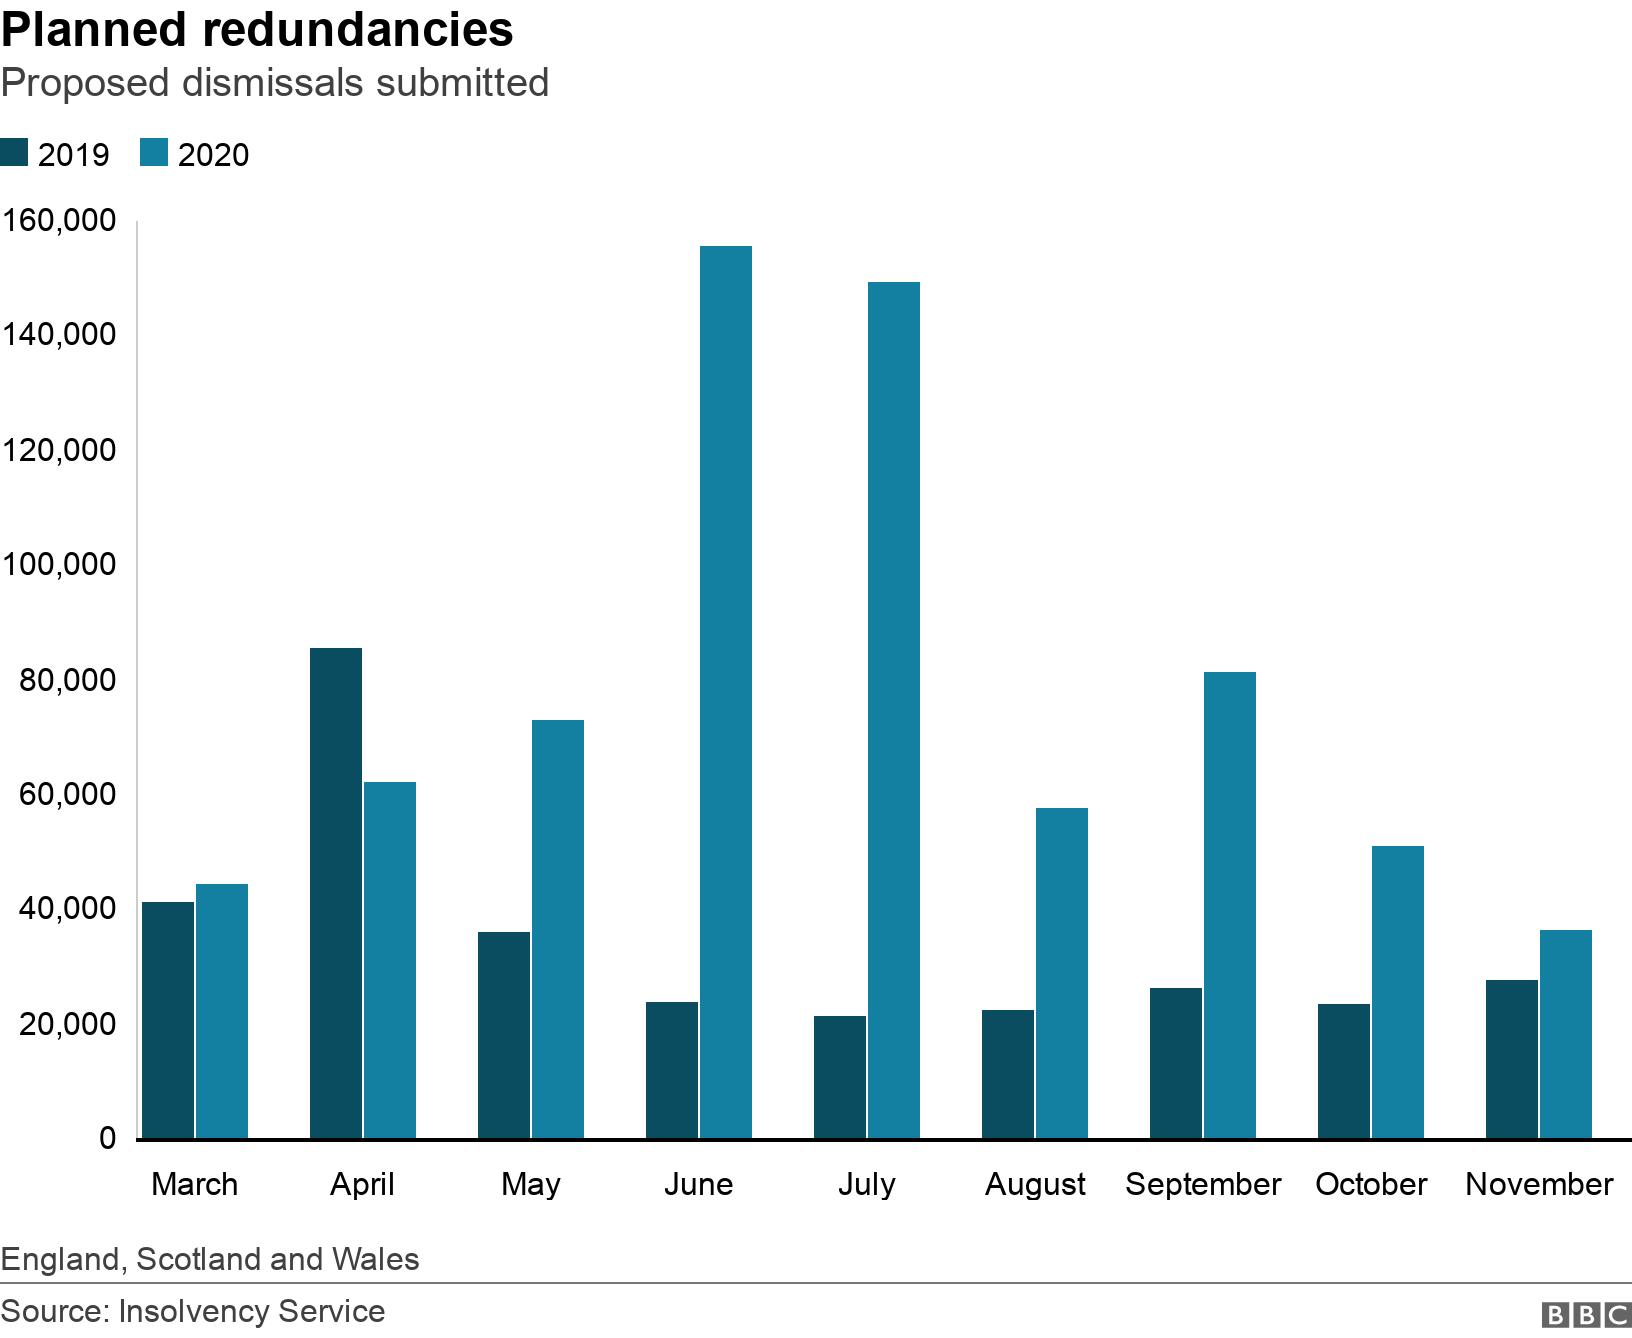 Planned redundancies. Proposed dismissals submitted. Graph of proposed redundancies by month from March to November 2020, with 2019 figures for comparison  England, Scotland and Wales.